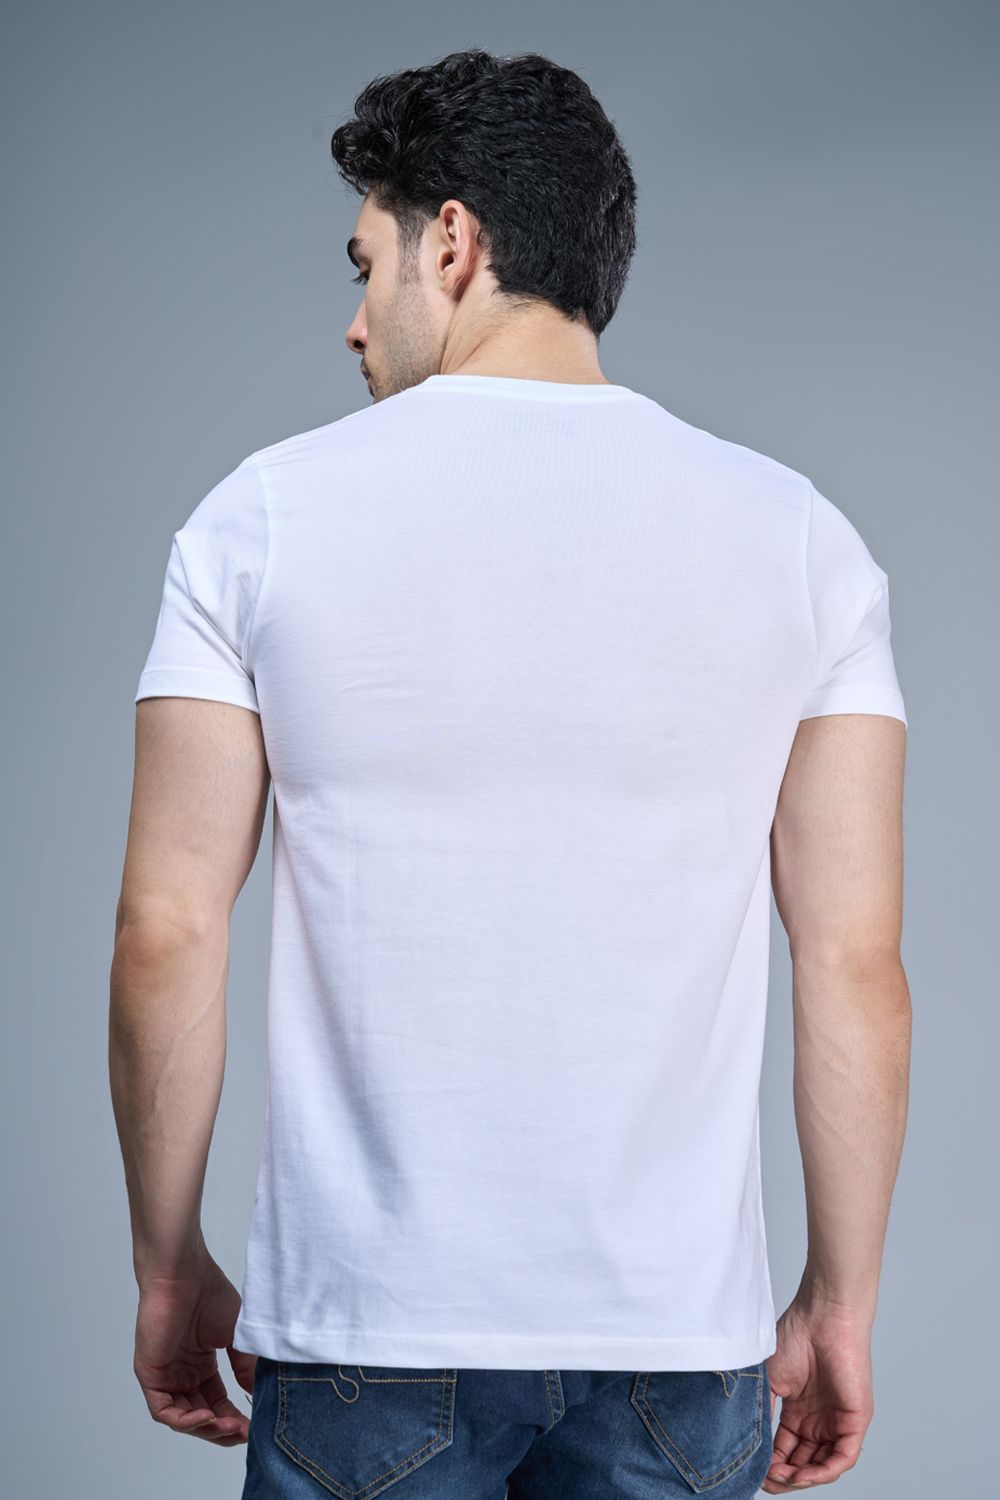 Silver colored, cotton Graphic T shirt for men, half sleeves and round neck, back view.